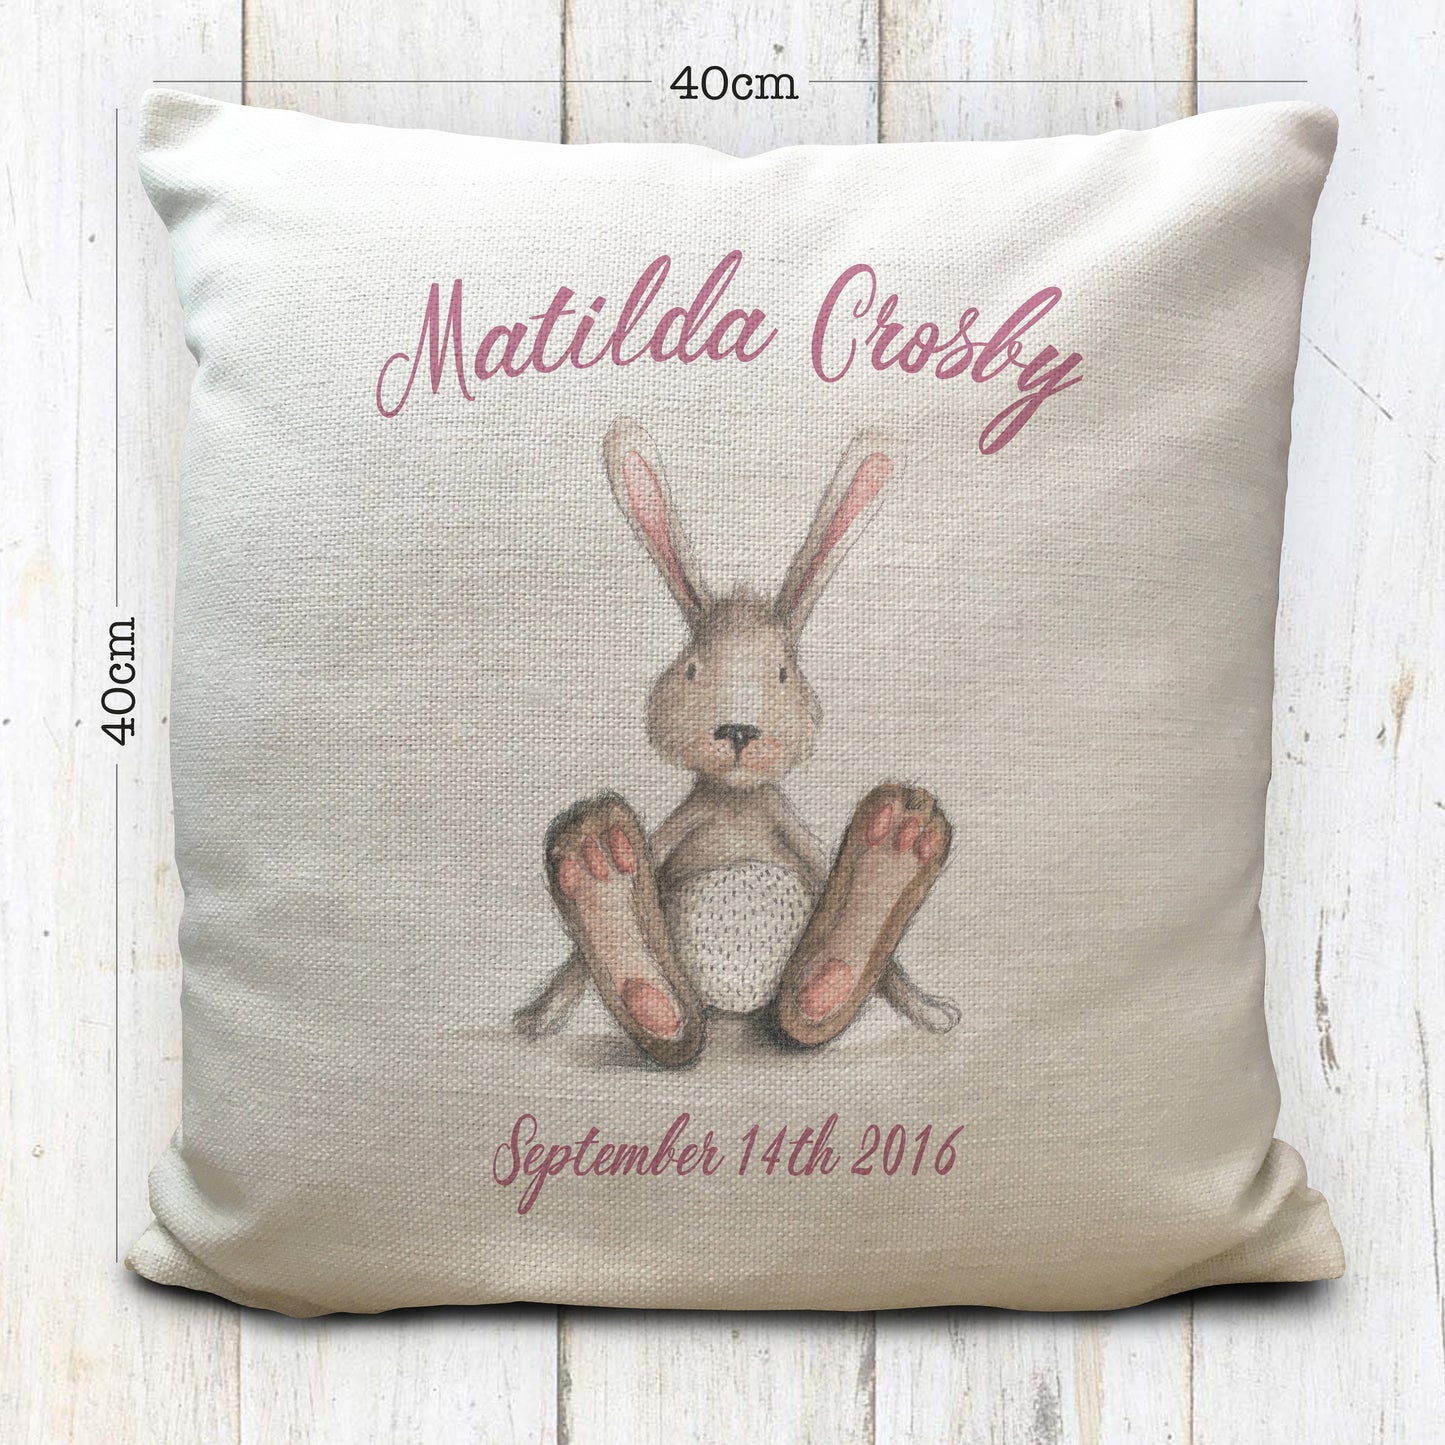 Personalised new baby christening birthday cushion cover gift bunny rabbit design measurements